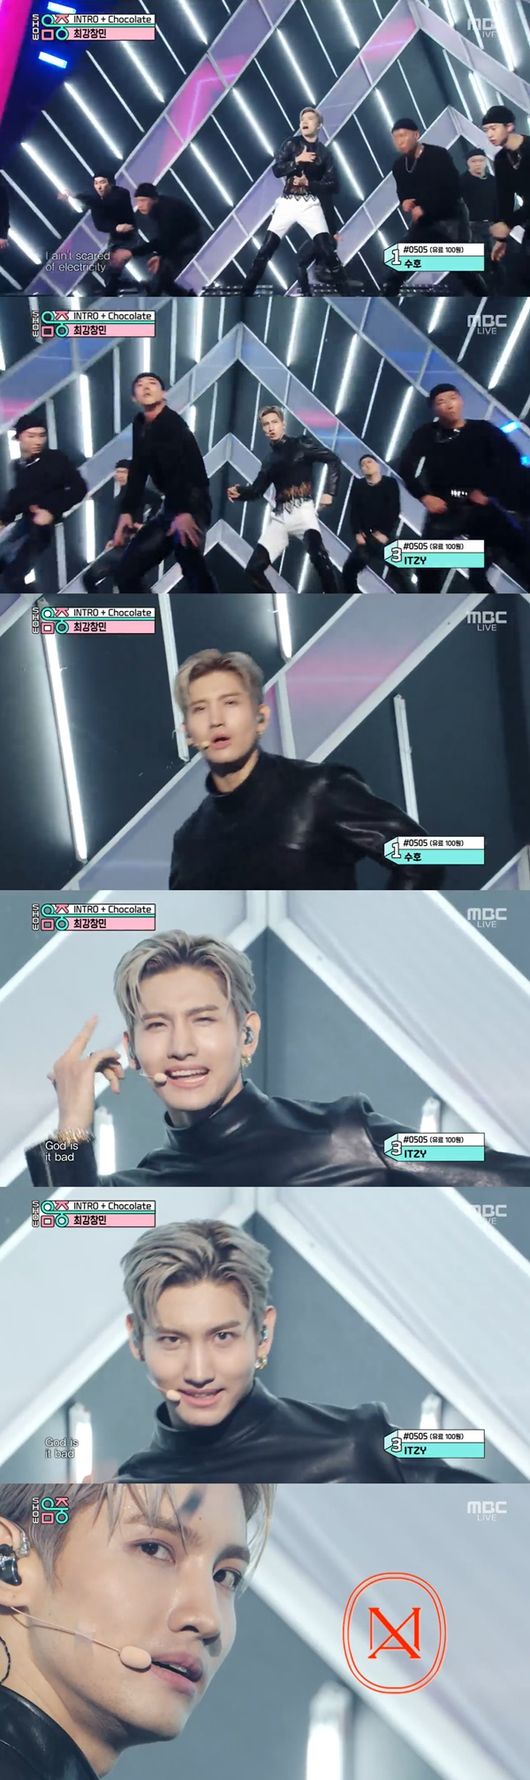 How!Music Core Changmin, (girl) children, Stellar, MCND, etc., showed off a colorful comeback stage, while EXO Suho became the main character in the second week of April.On MBCs Show! Music Core (hereinafter referred to as Drinking), which aired on the afternoon of the 11th, EXO Suho, MC The Max (M.C the MAX) and ITZY were named as the top candidates.EXO Suho held the top trophy in his arms without a broadcast appearance; he released his first solo album, Self-Portrait, on the 30th of last month; the title song was Love, Lets.Suho is a song that participated in the lyrics directly, and it is a poor and lacking in expressing love, but it is an impressive track that encourages each other to love.The stage that caught the attention of K-pop fans at once was by far Changmins solo comeback.Changmin released his mini album Chocolate, which features the charm of the ultra-strong homme fatale for the first time since debut on the 6th.In particular, Changmin is the first solo album to be released since debut, so he participated in the title song Chocolate and the song No Tomorrow.In addition to the sensual lyrics, Changmins unique powerful performance attracted viewers attention.He boasted a deadly yet sexy sword dance and stable live skills, and showed off his delicate harmony.Changmin said, Thank you for waiting and thank you for your support.I expressed the heart of a man who wants to have a reason for his favorite, with the heart of a person who wants to eat chocolate. He introduced his new song Chocolate.In particular, Changmin is the favorite lyrics, There is a part that expresses crazy heart keeps rising, and I like the word crazy heart.I am like a crazy heart now because I have come to drinking for a long time. As for the costume concept, he smiled, I emphasized sexy with the combination of Leather and see-through.The comeback stage of (girl) children who show off their unique concept digestion power for each album is also indispensable.(Women) The children opened their third mini album I trust, Oh my god, which was released on the 6th.Oh my god is a song that realizes that I have to believe in myself through the confrontation with reality through the feelings of rejection, confusion, recognition, and dignity.It also features a dreamy atmosphere and intense sound.Especially, (girl) children had the fun and the pleasure of listening to the first row of fans with fascinating visuals, sophisticated tone, and intense eyes.In addition, the group signature, which made a high-speed comeback with ASSA in two months after debut on the 7th, has released its unique positive energy with costumes featuring white and black points.Boy group MCND, who won the title Monster Rookie at the same time as Debut, returned to Spring with hopeful energy.MCNDs new song Spring is a song that perfectly harmonizes rapper lines Castle J, BIC, WINs unique lapping, refreshing Minjae, and Hui Juns vocals.Singer-songwriter Stellar, wearing a black horn headband, made his comeback on the 7th with his first full-length album STELLA I title song Villain released in four years of debut.The new song Villain is a song that solves the ambivalence and diversity of human beings that inevitably have with the keyword macromander.Stage genius One Earth showed perfect performance that seemed to be one of five people with easy written song.Hong Jin-young, who is expanding the broader spectrum in the Trot market, boasted a mysterious charm with love is like a petal.On the other hand, MBC Show!Music Core featured Changmin, (girl) children, Lim Young-woong, Young-tak, Hong Jin-young, Se-jeong, Signature, MCND, One Earth, Leah, TOO (thio), FAVORITE, HYNN (Park Hye-won), Stellar, Hajin, and MY.st (Mist).MBC Show! Music Core captures broadcast screen